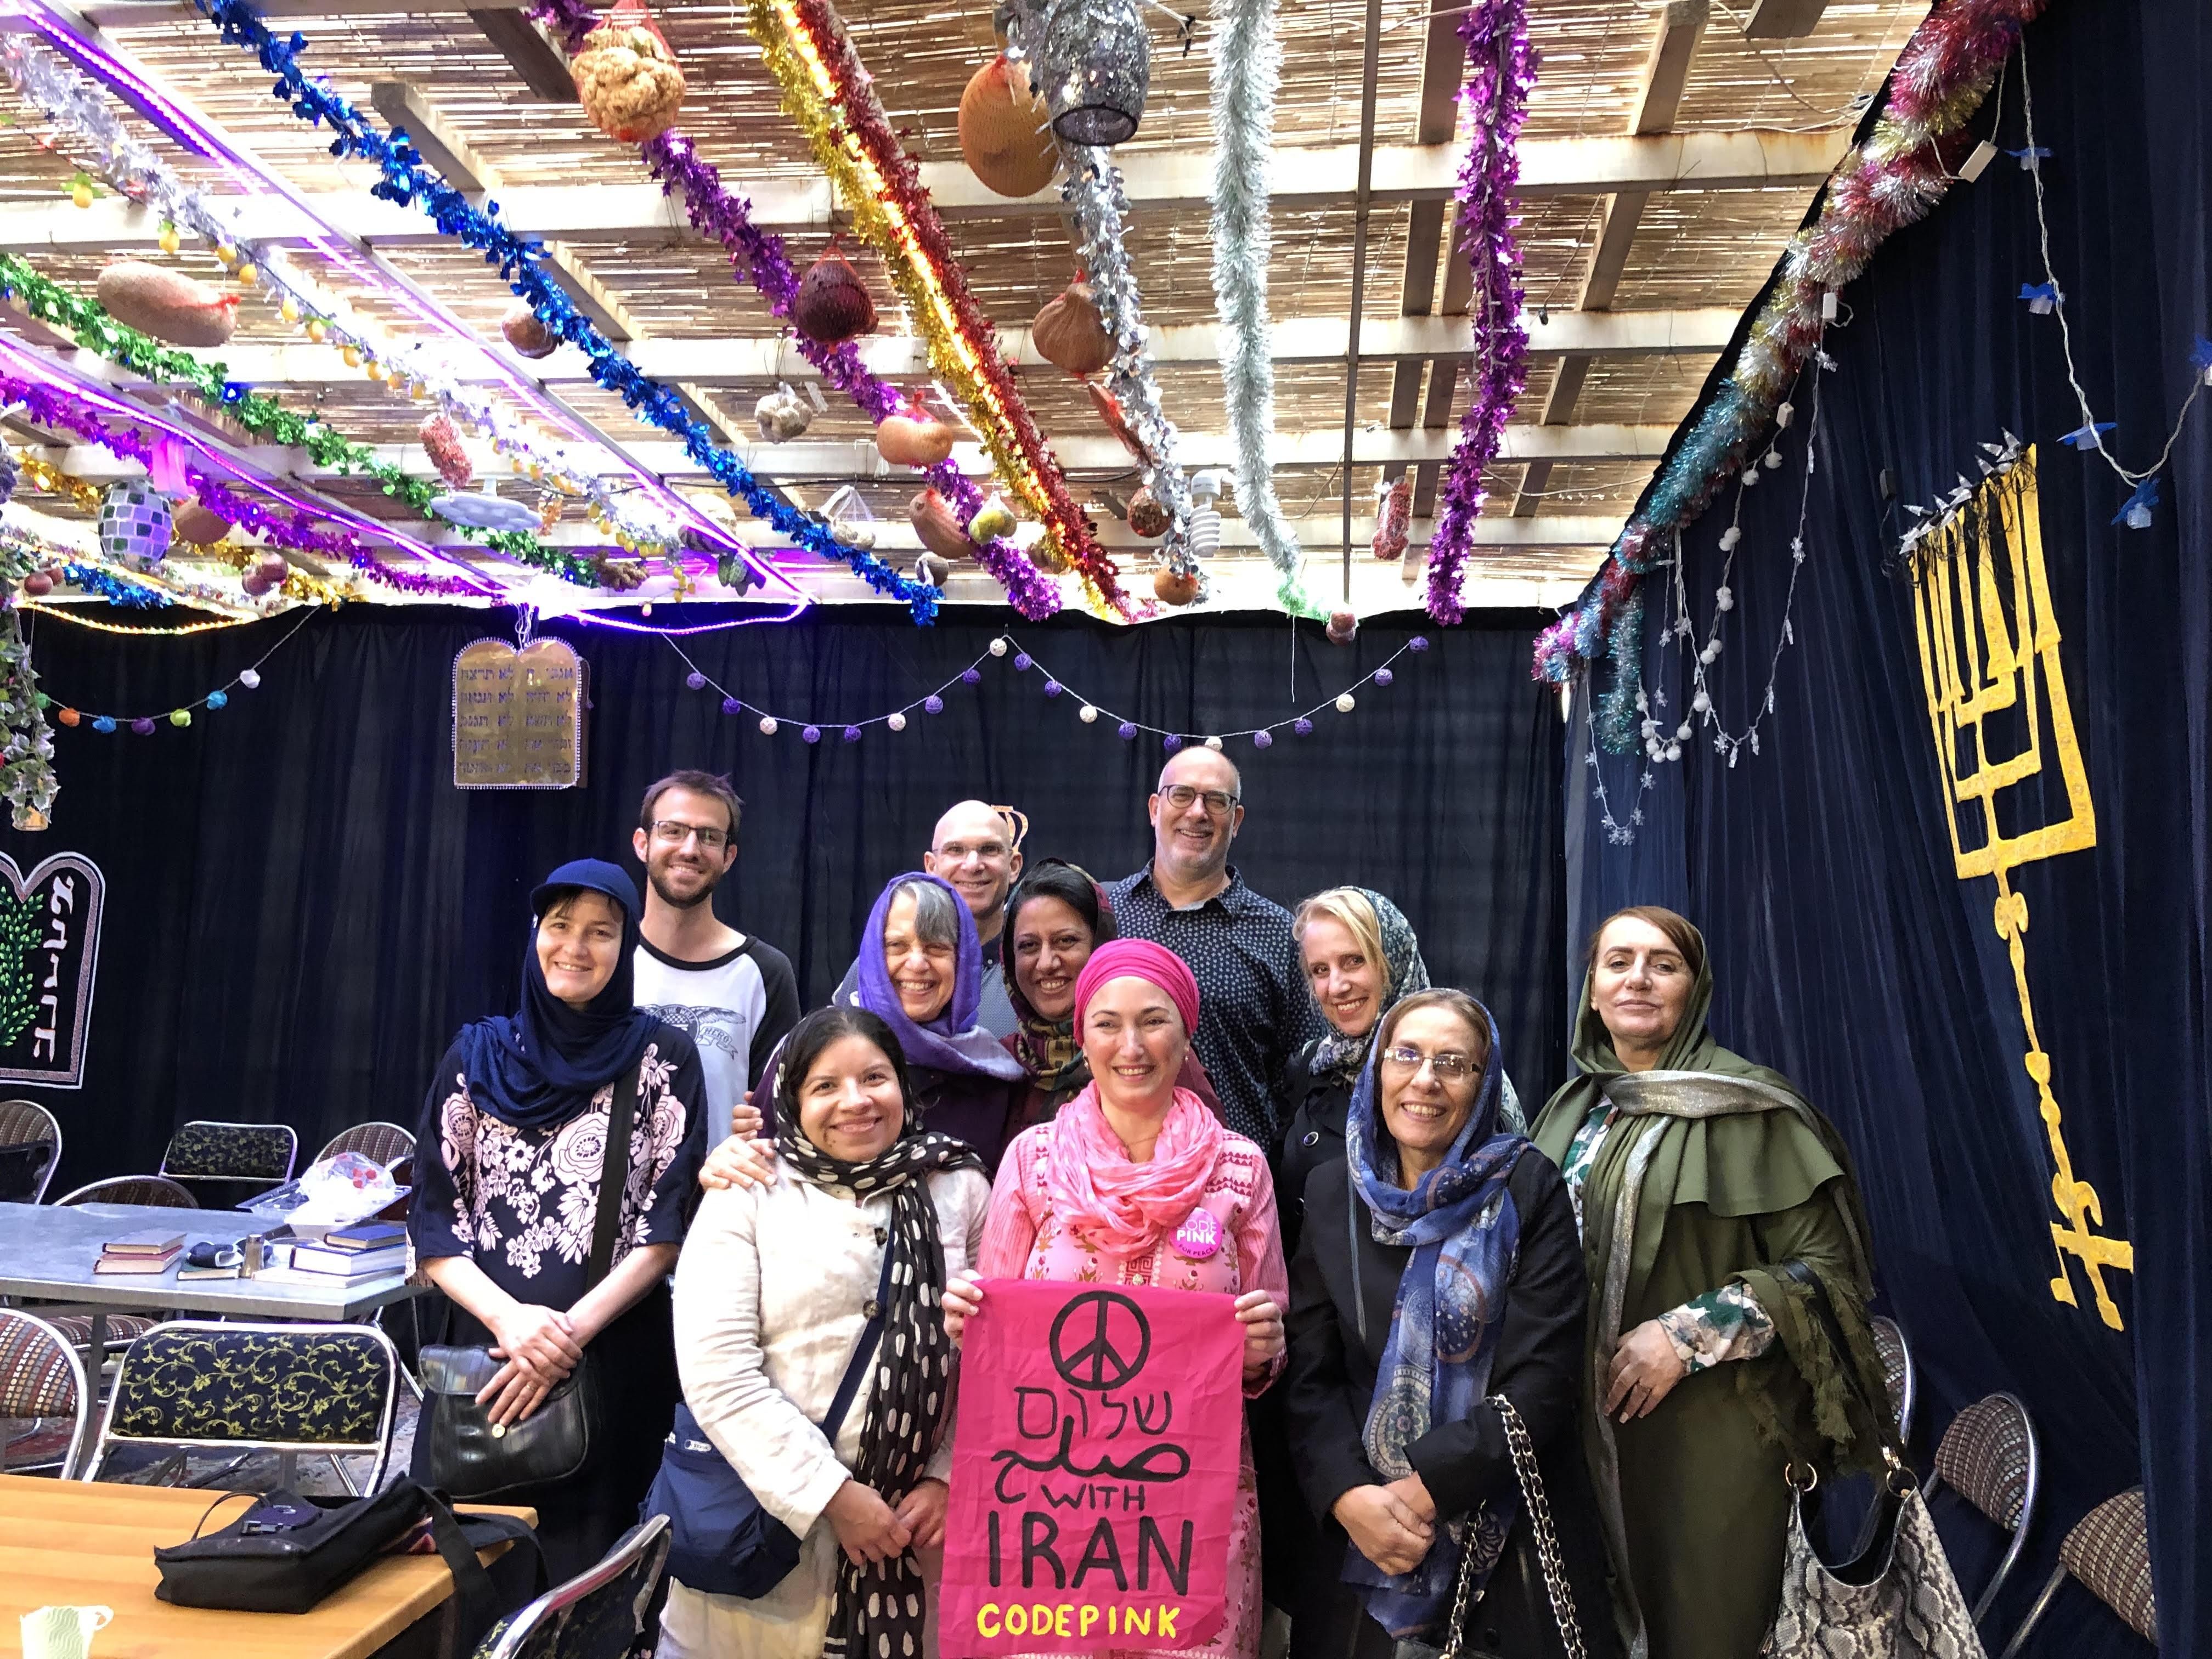 CODEPINK delegation in the sukkot of the Yusef Abad synagogue. (Photo: CODEPINK)